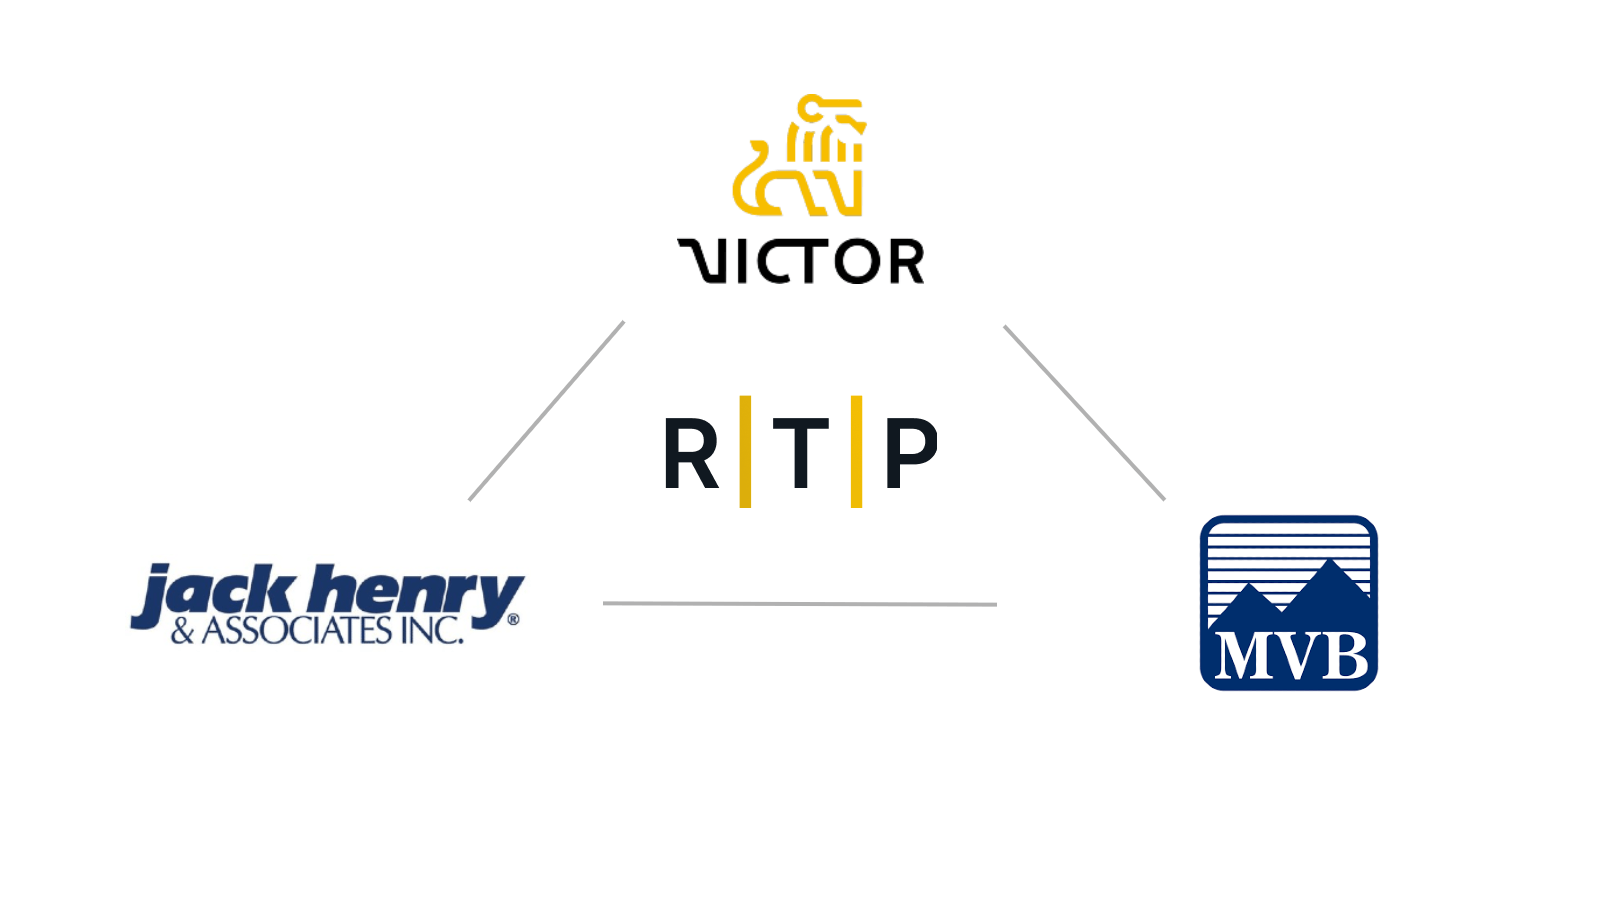 Jack Henry Collaborates with Victor Technologies and MVB Bank to Offer Faster Payments Capabilities